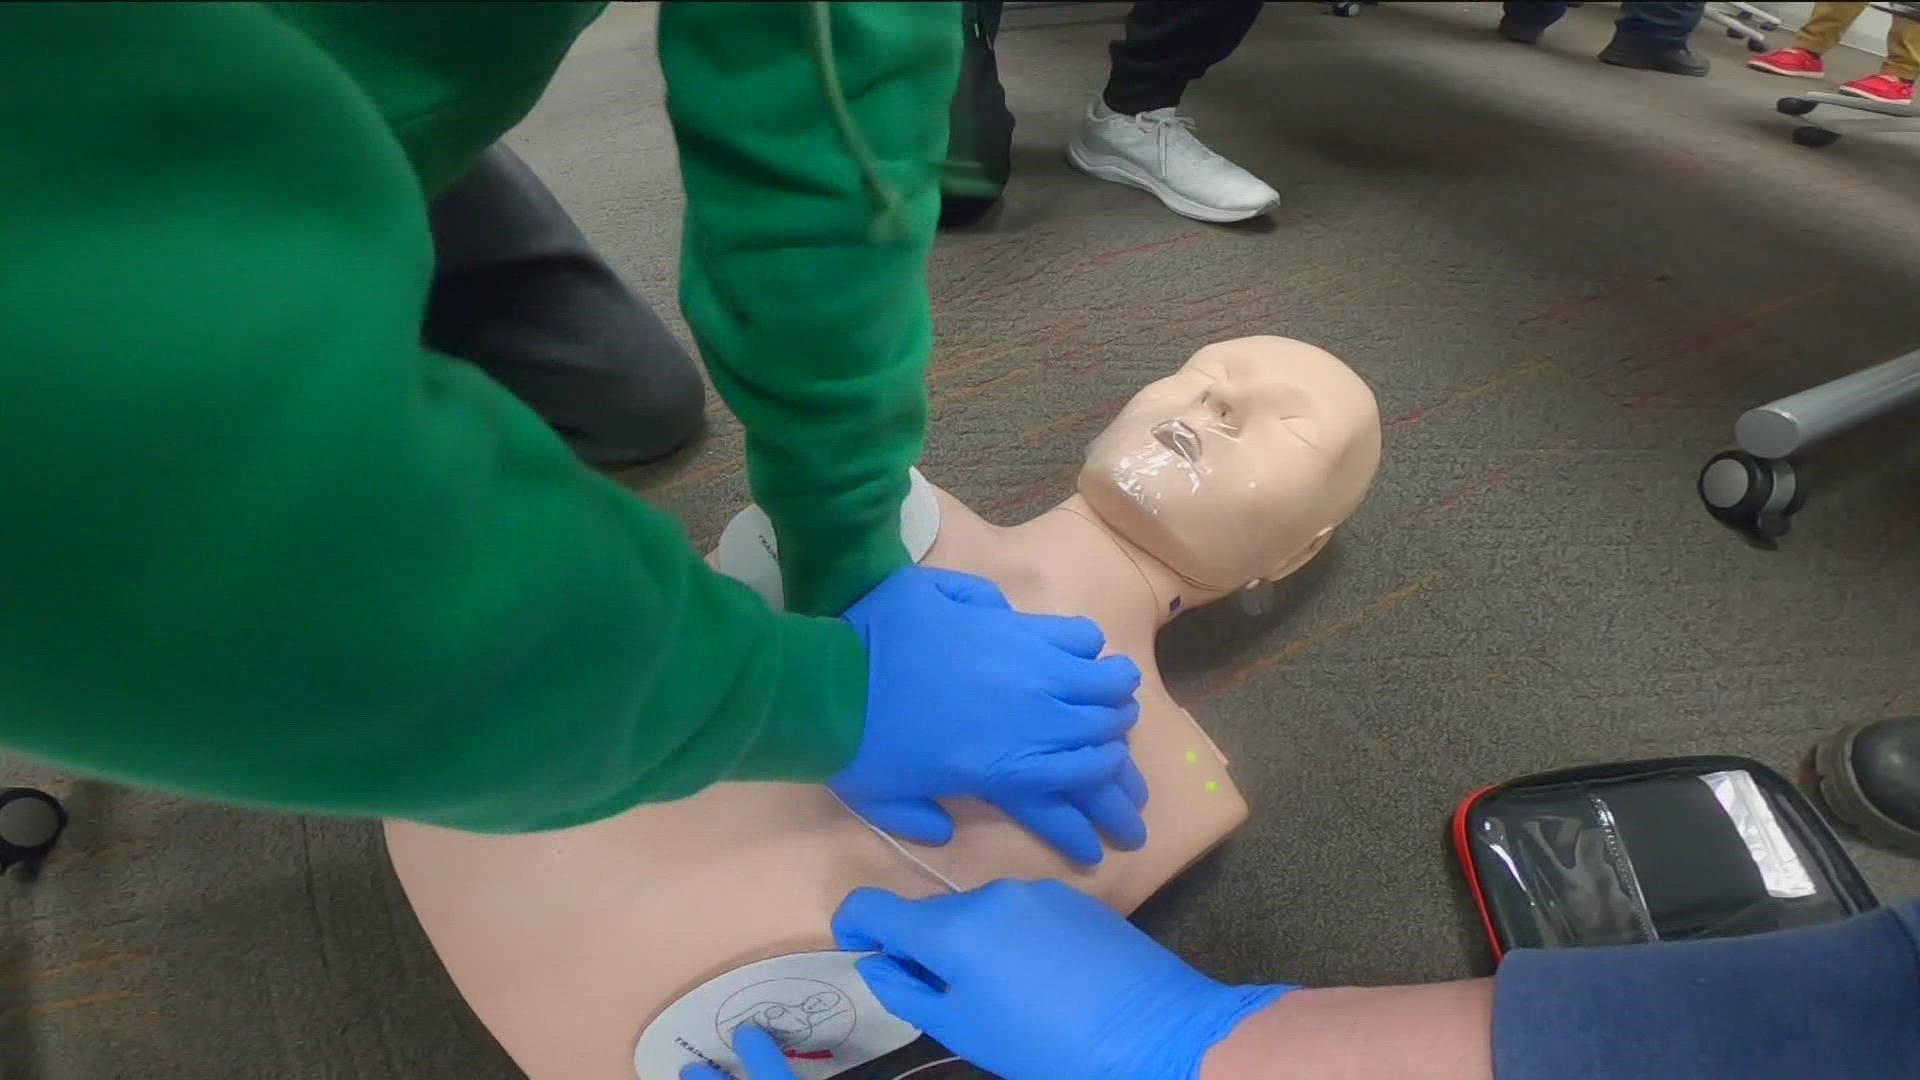 Throughout the week, the Port Clinton Fire Department worked with the city's high school to certify freshmen in CPR, EpiPen administration and other first-aid skills